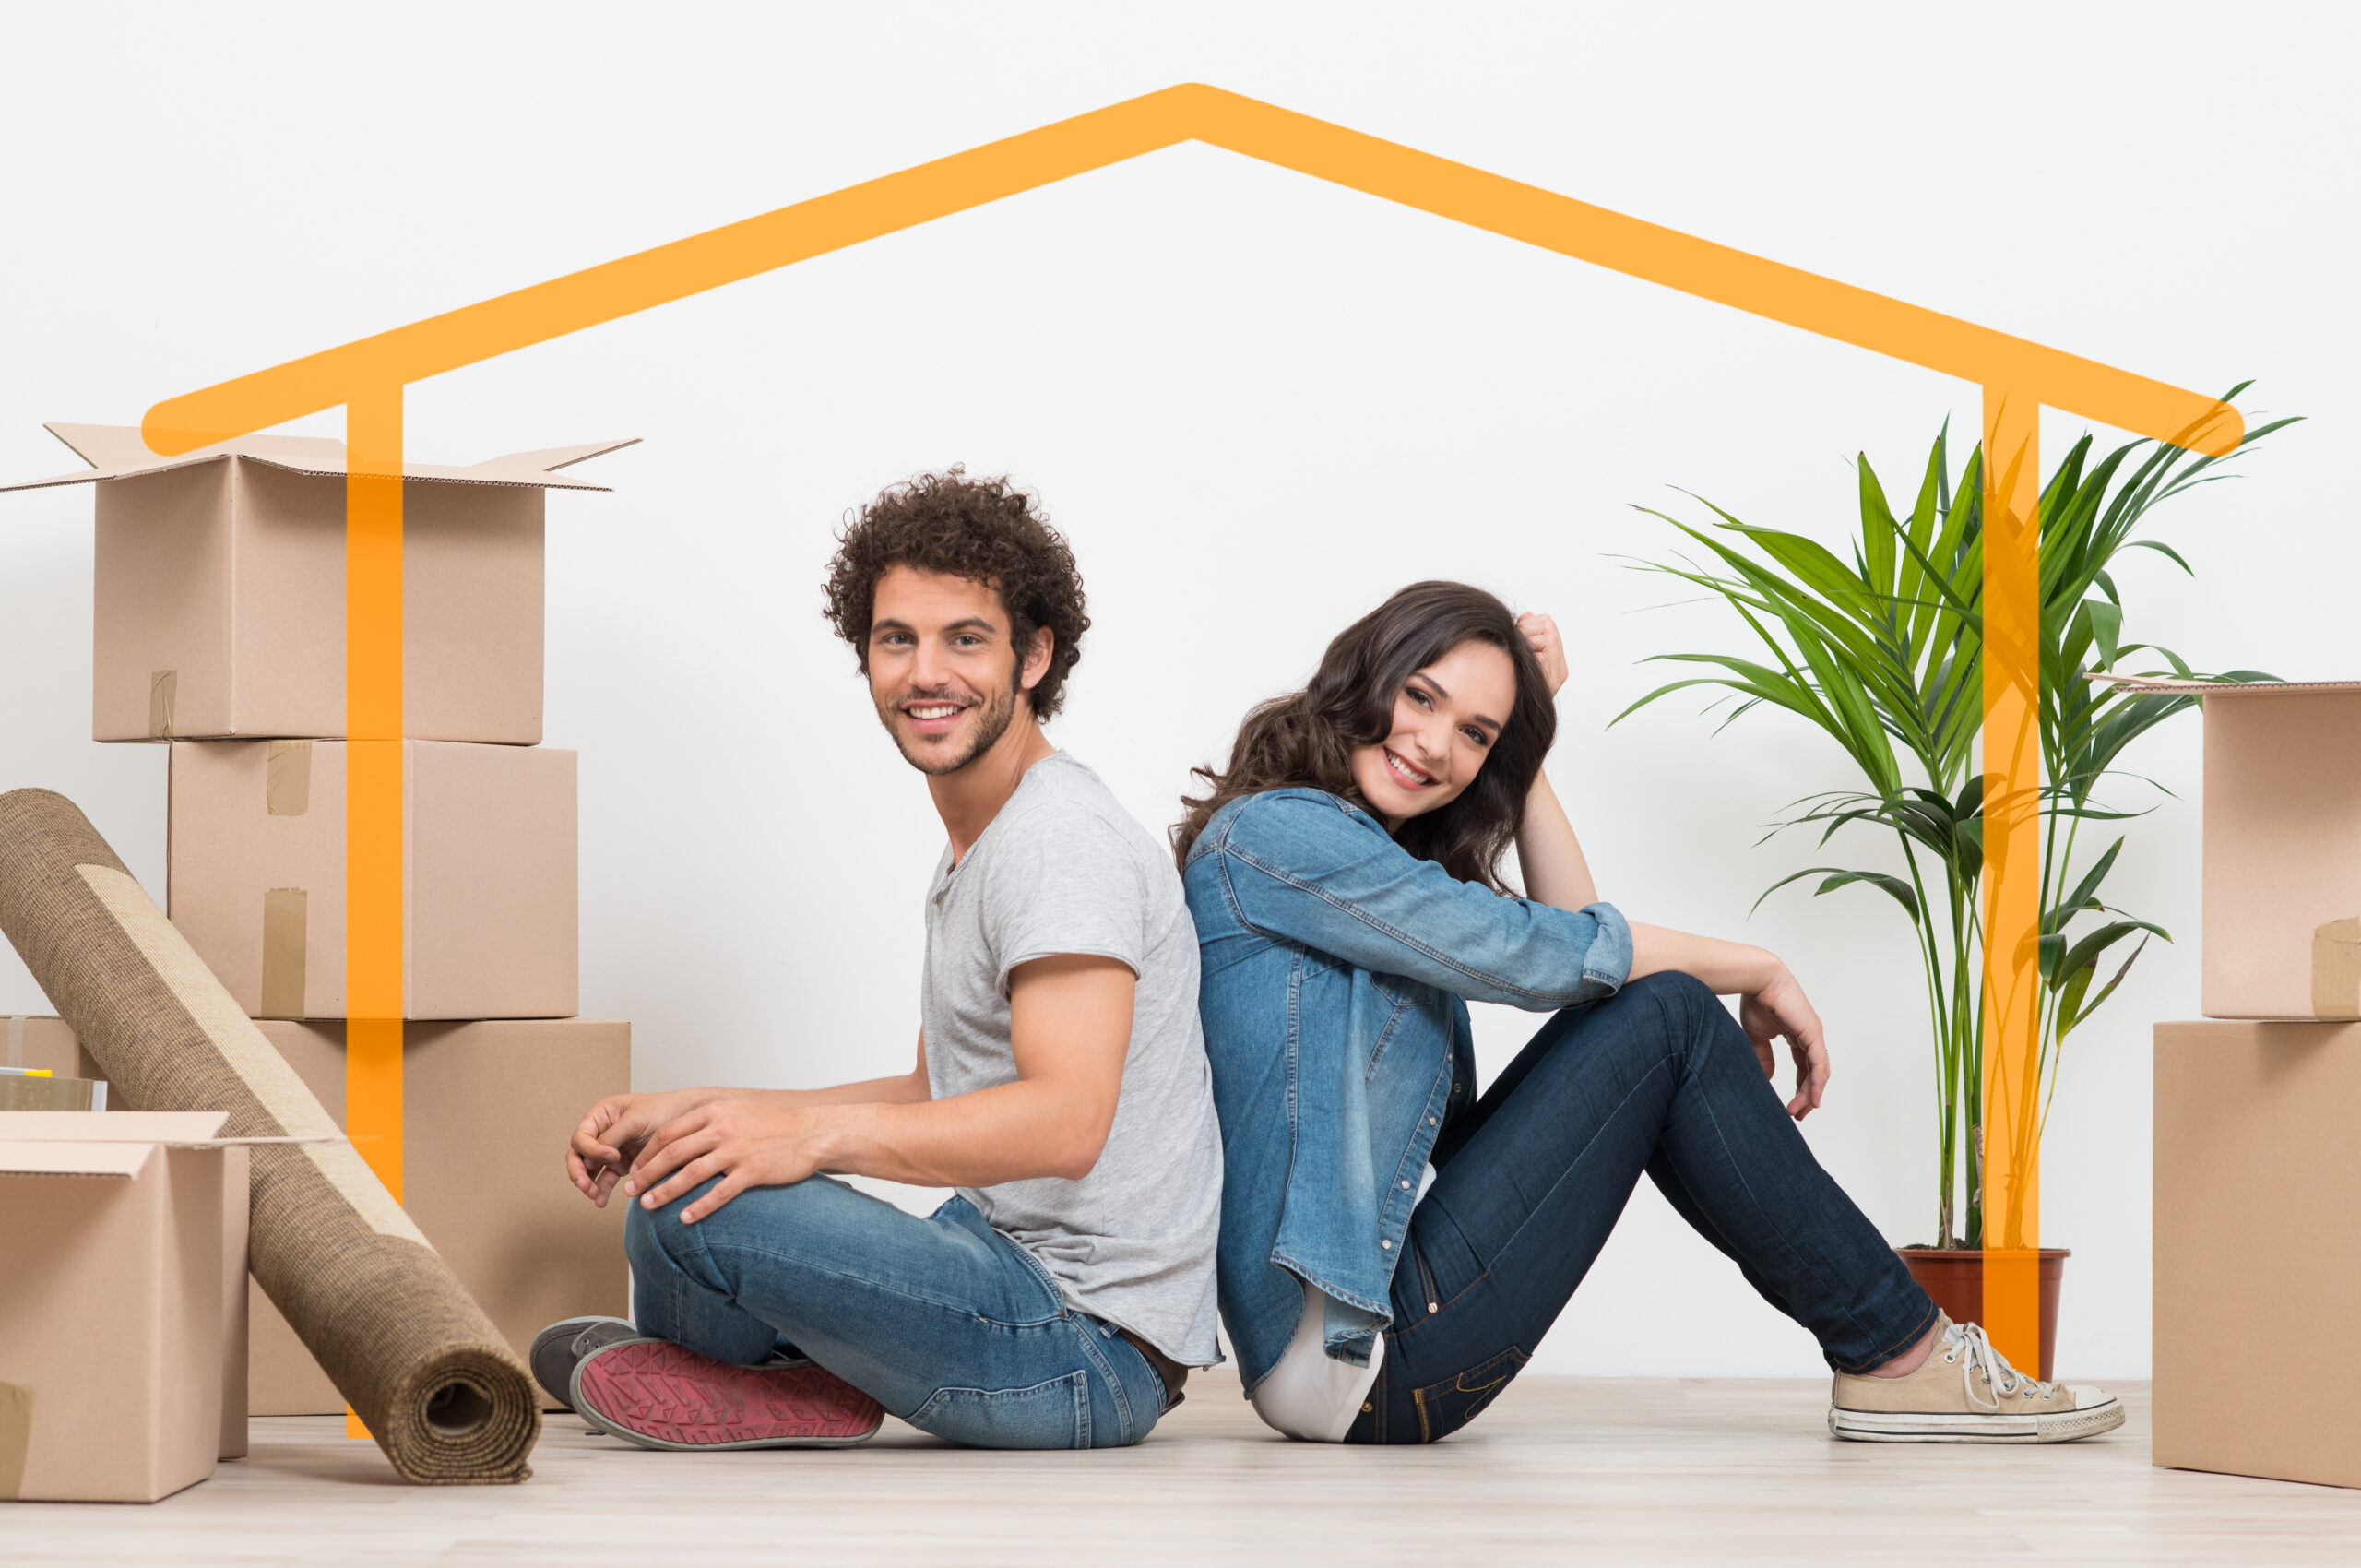 Stock imagery of people moving into a house - Start your property journey on Share to Buy!